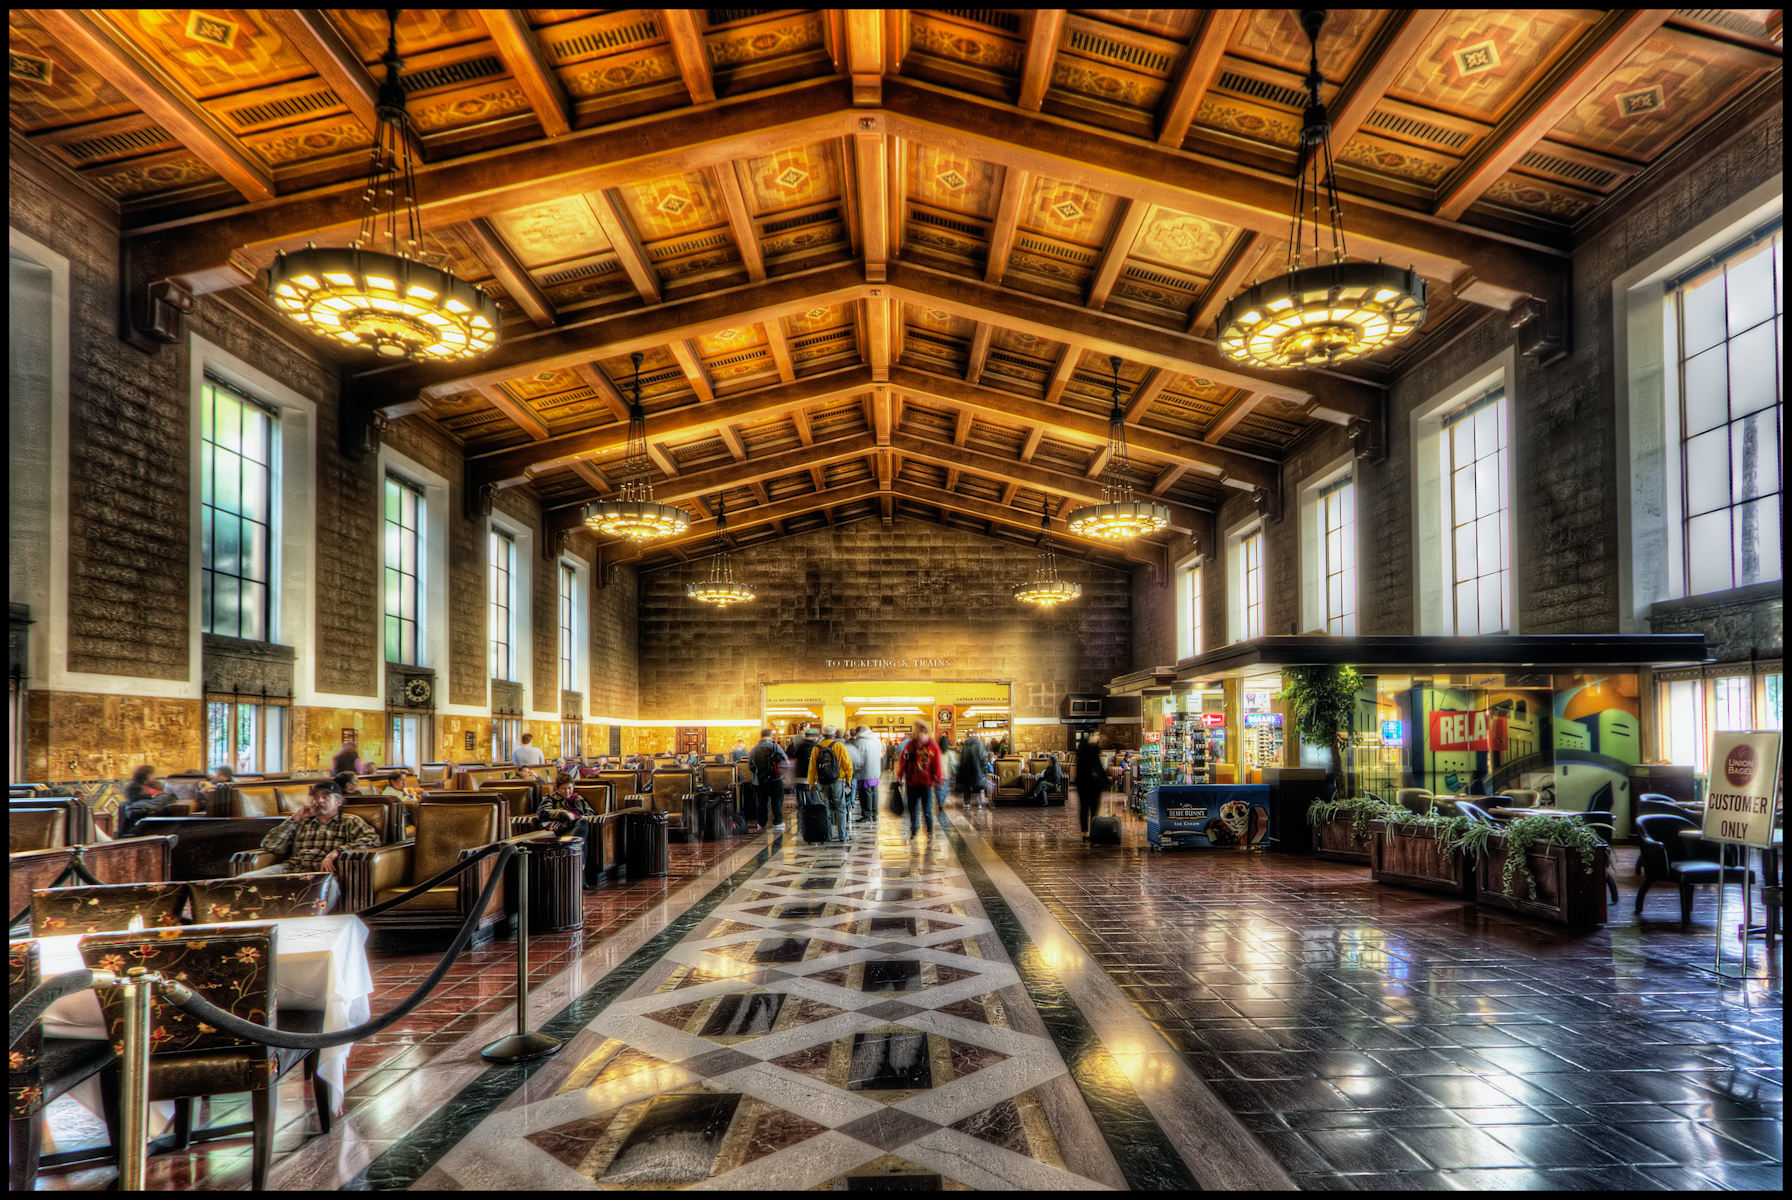 The Los Angeles Union Station is very nice. Not that I am biased, but it is nicer than several others I have visited (Washington DC, St Louis). So many nice photo opportunities in LA. Hope to get out tomorrow to the CicLAvia. ISO 100, 10mm, f6.3, (1/5, 0.8, 3.2). Used a wider aperture than I would normally choose to get a sharper focus because there are so many people walking around and 3 seconds is already a lot. My standard HDR workflow, Photomatix Details Enhancer, Imagenomic, Smart Sharpen, Lens Distortion, Freaky Details, Nik Pro Contrast, Lighten/Darken Center.